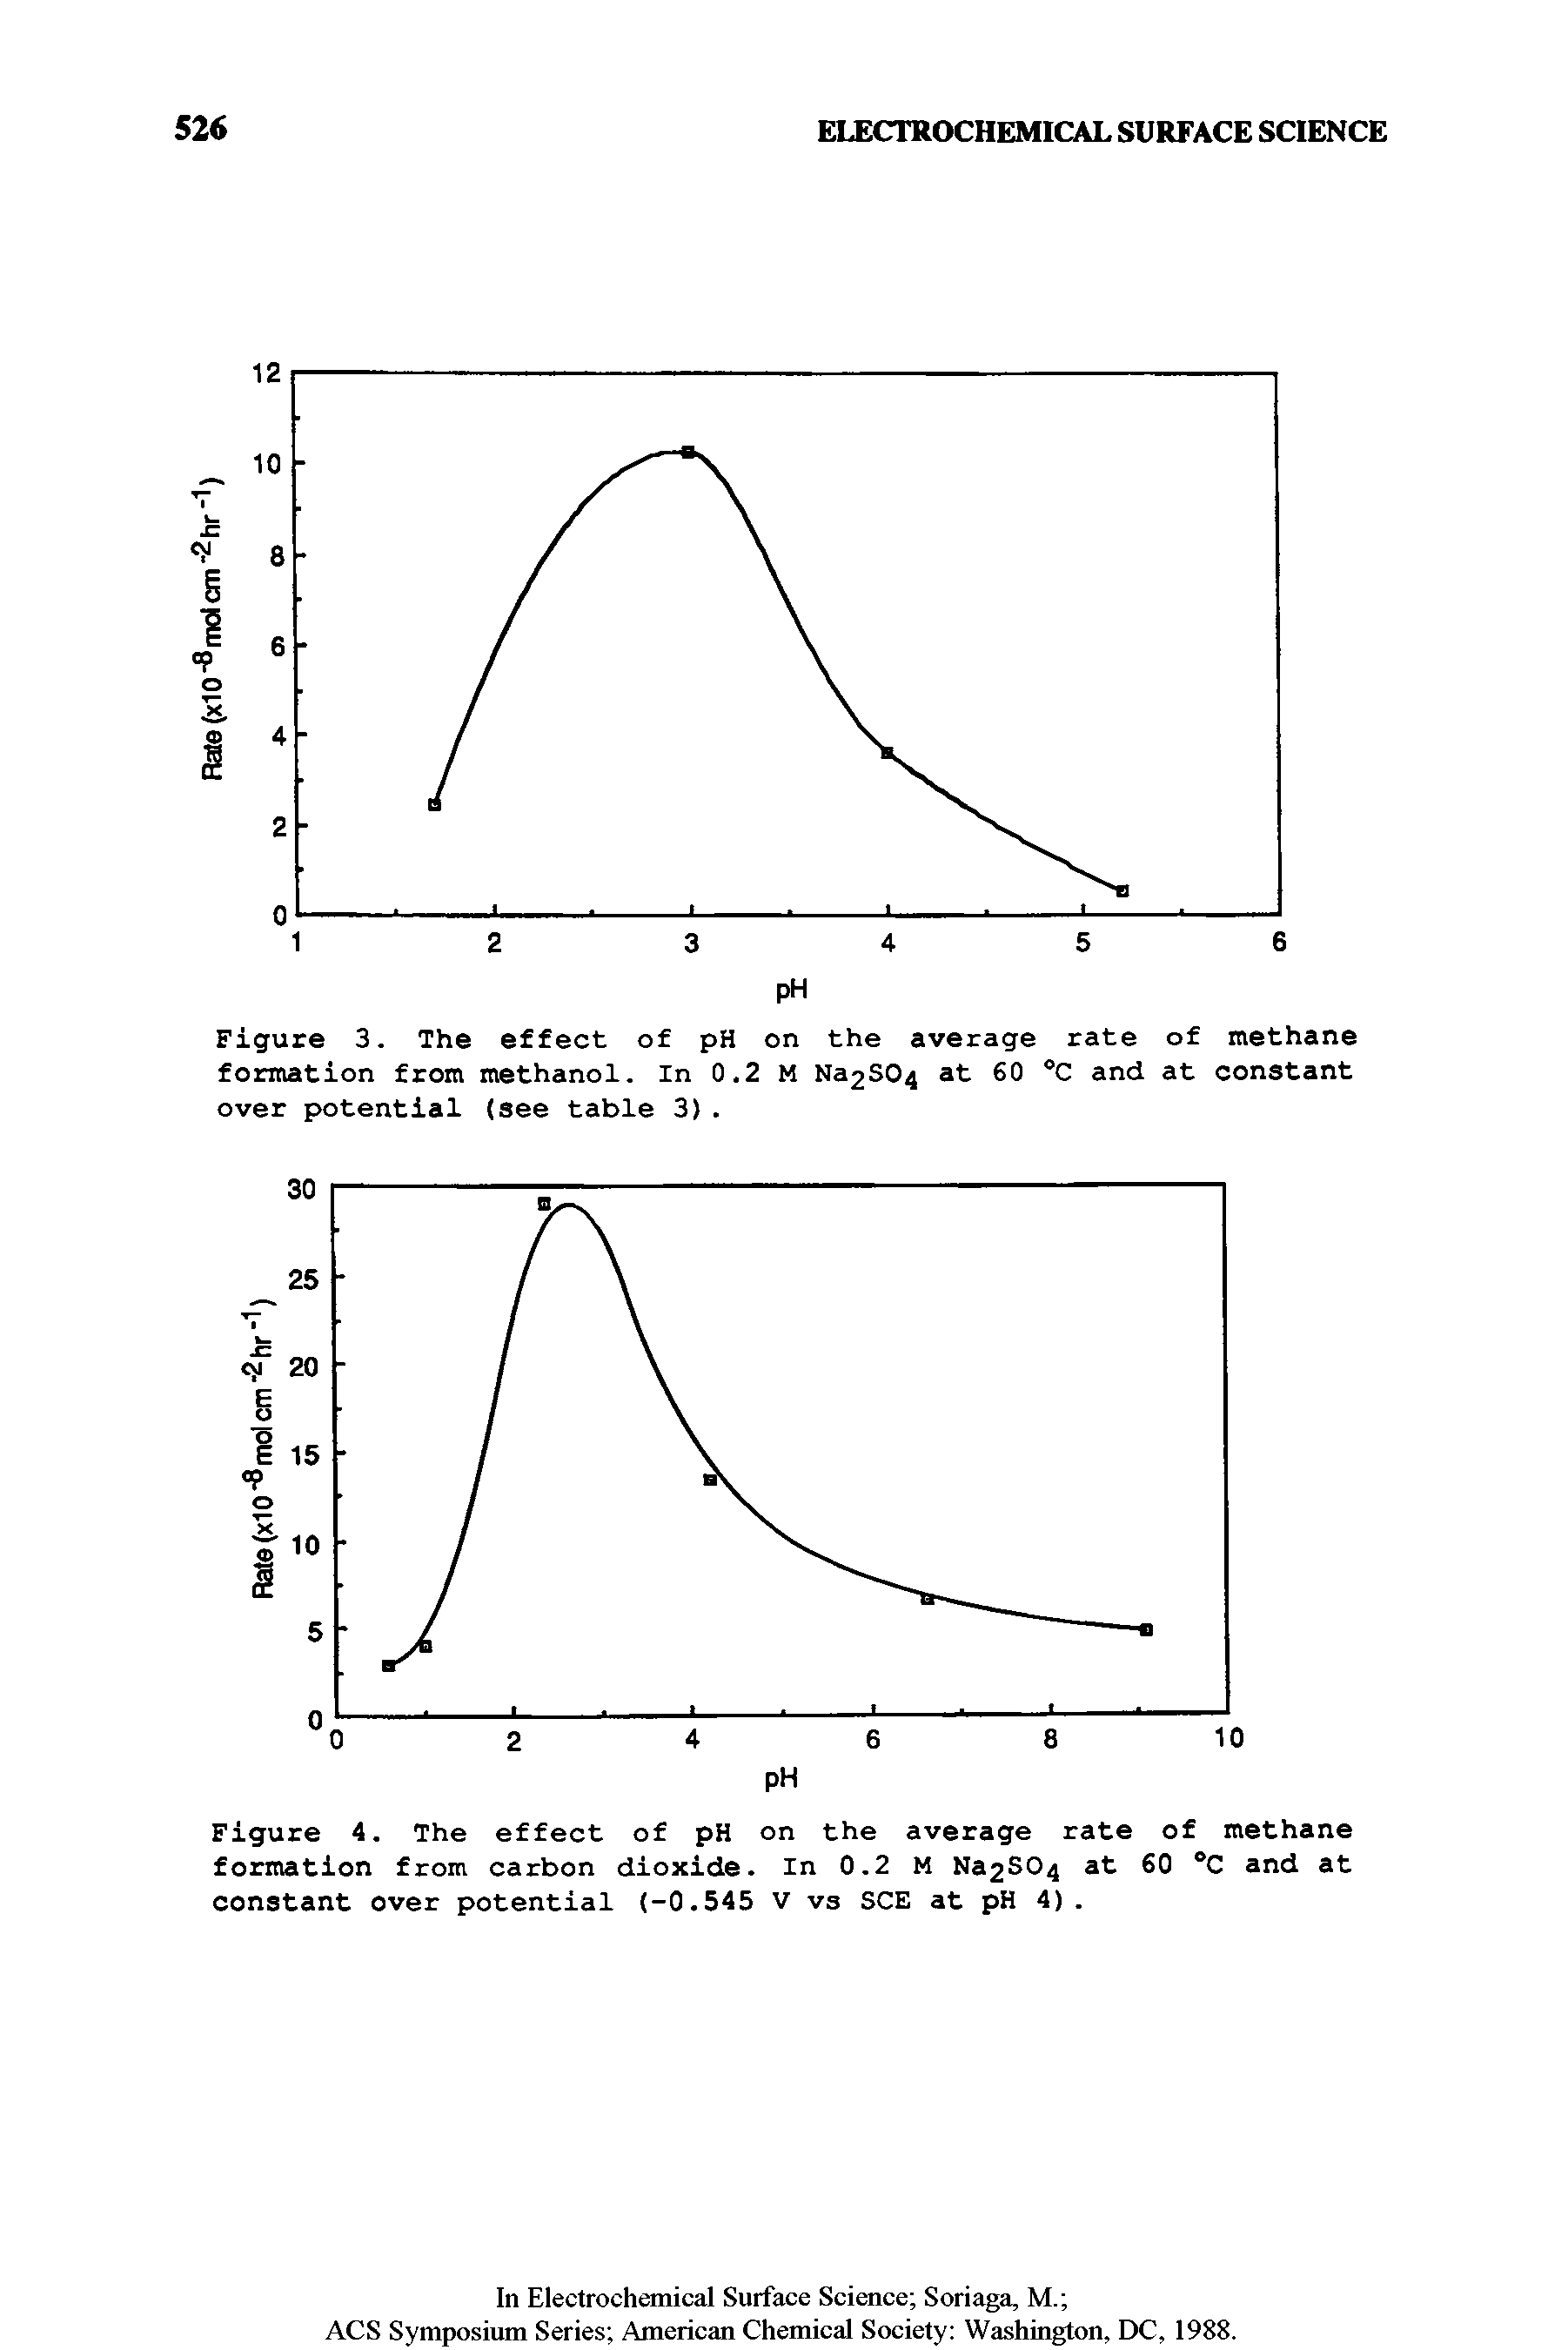 Figure 3. The effect of pH on the average rate of methane formation from methanol. In 0.2 M Na2S04 at 60 °C and at constant over potential (see table 3).